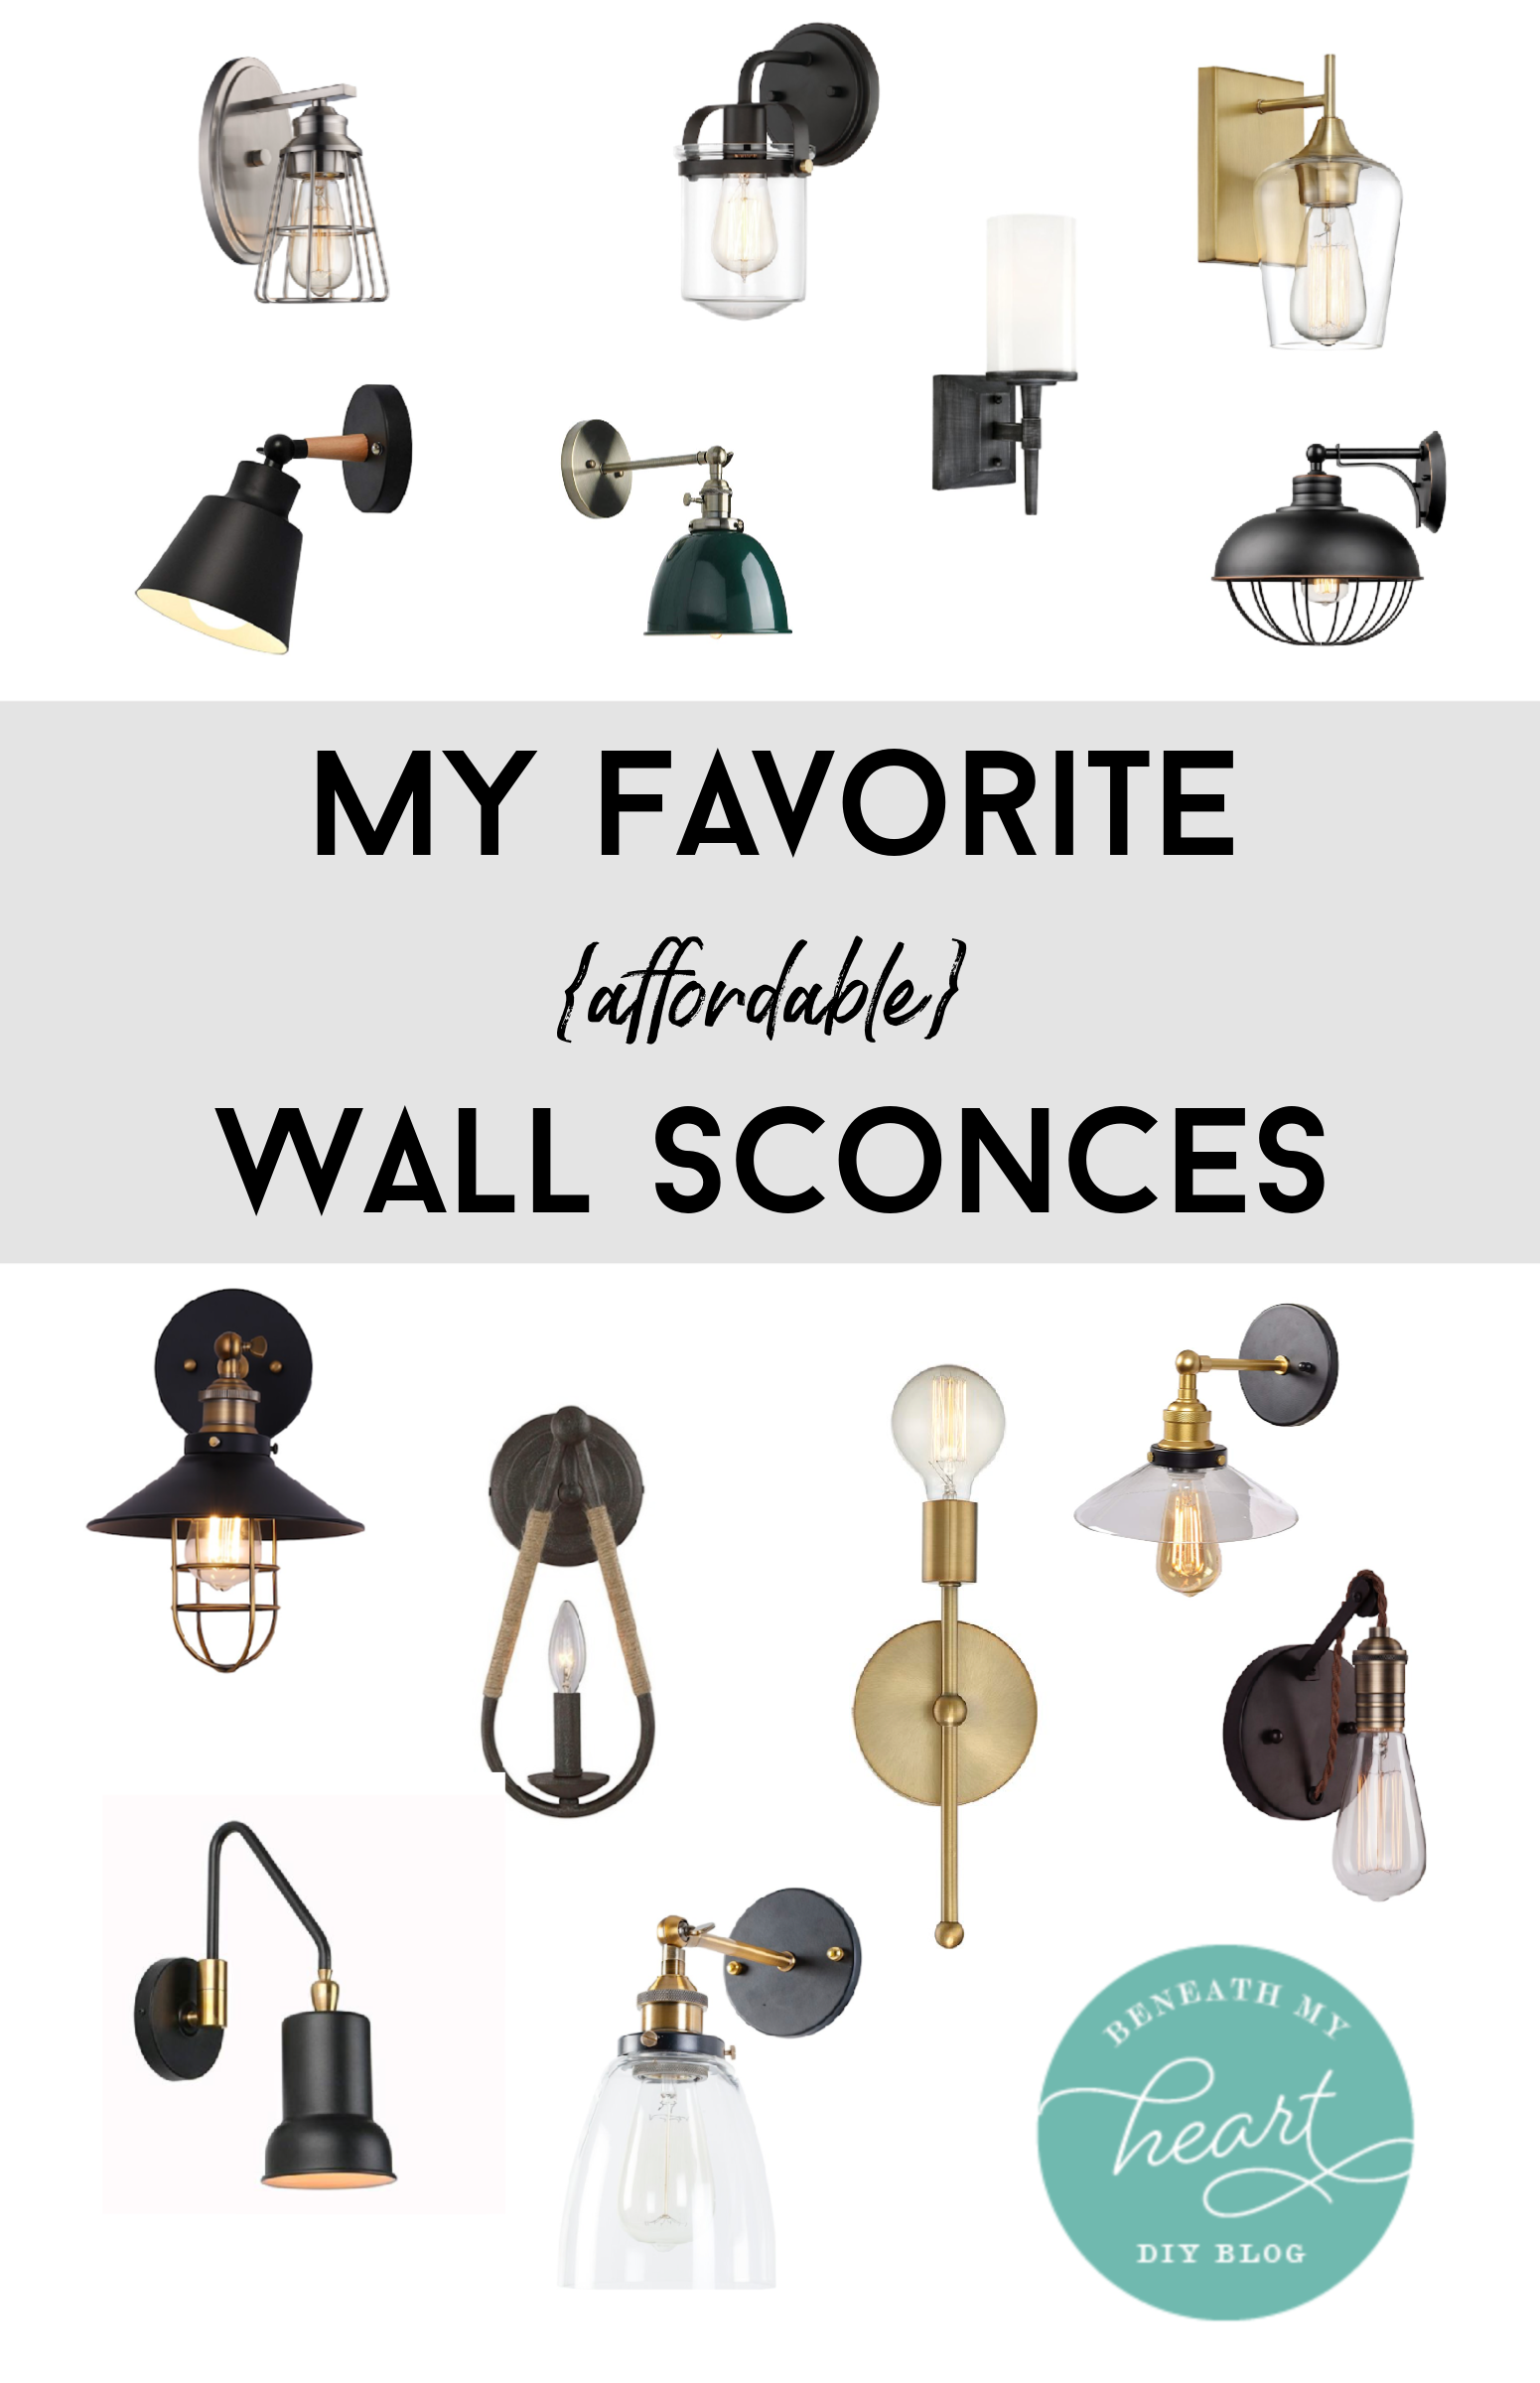 My Favorite (affordable) Wall Sconces